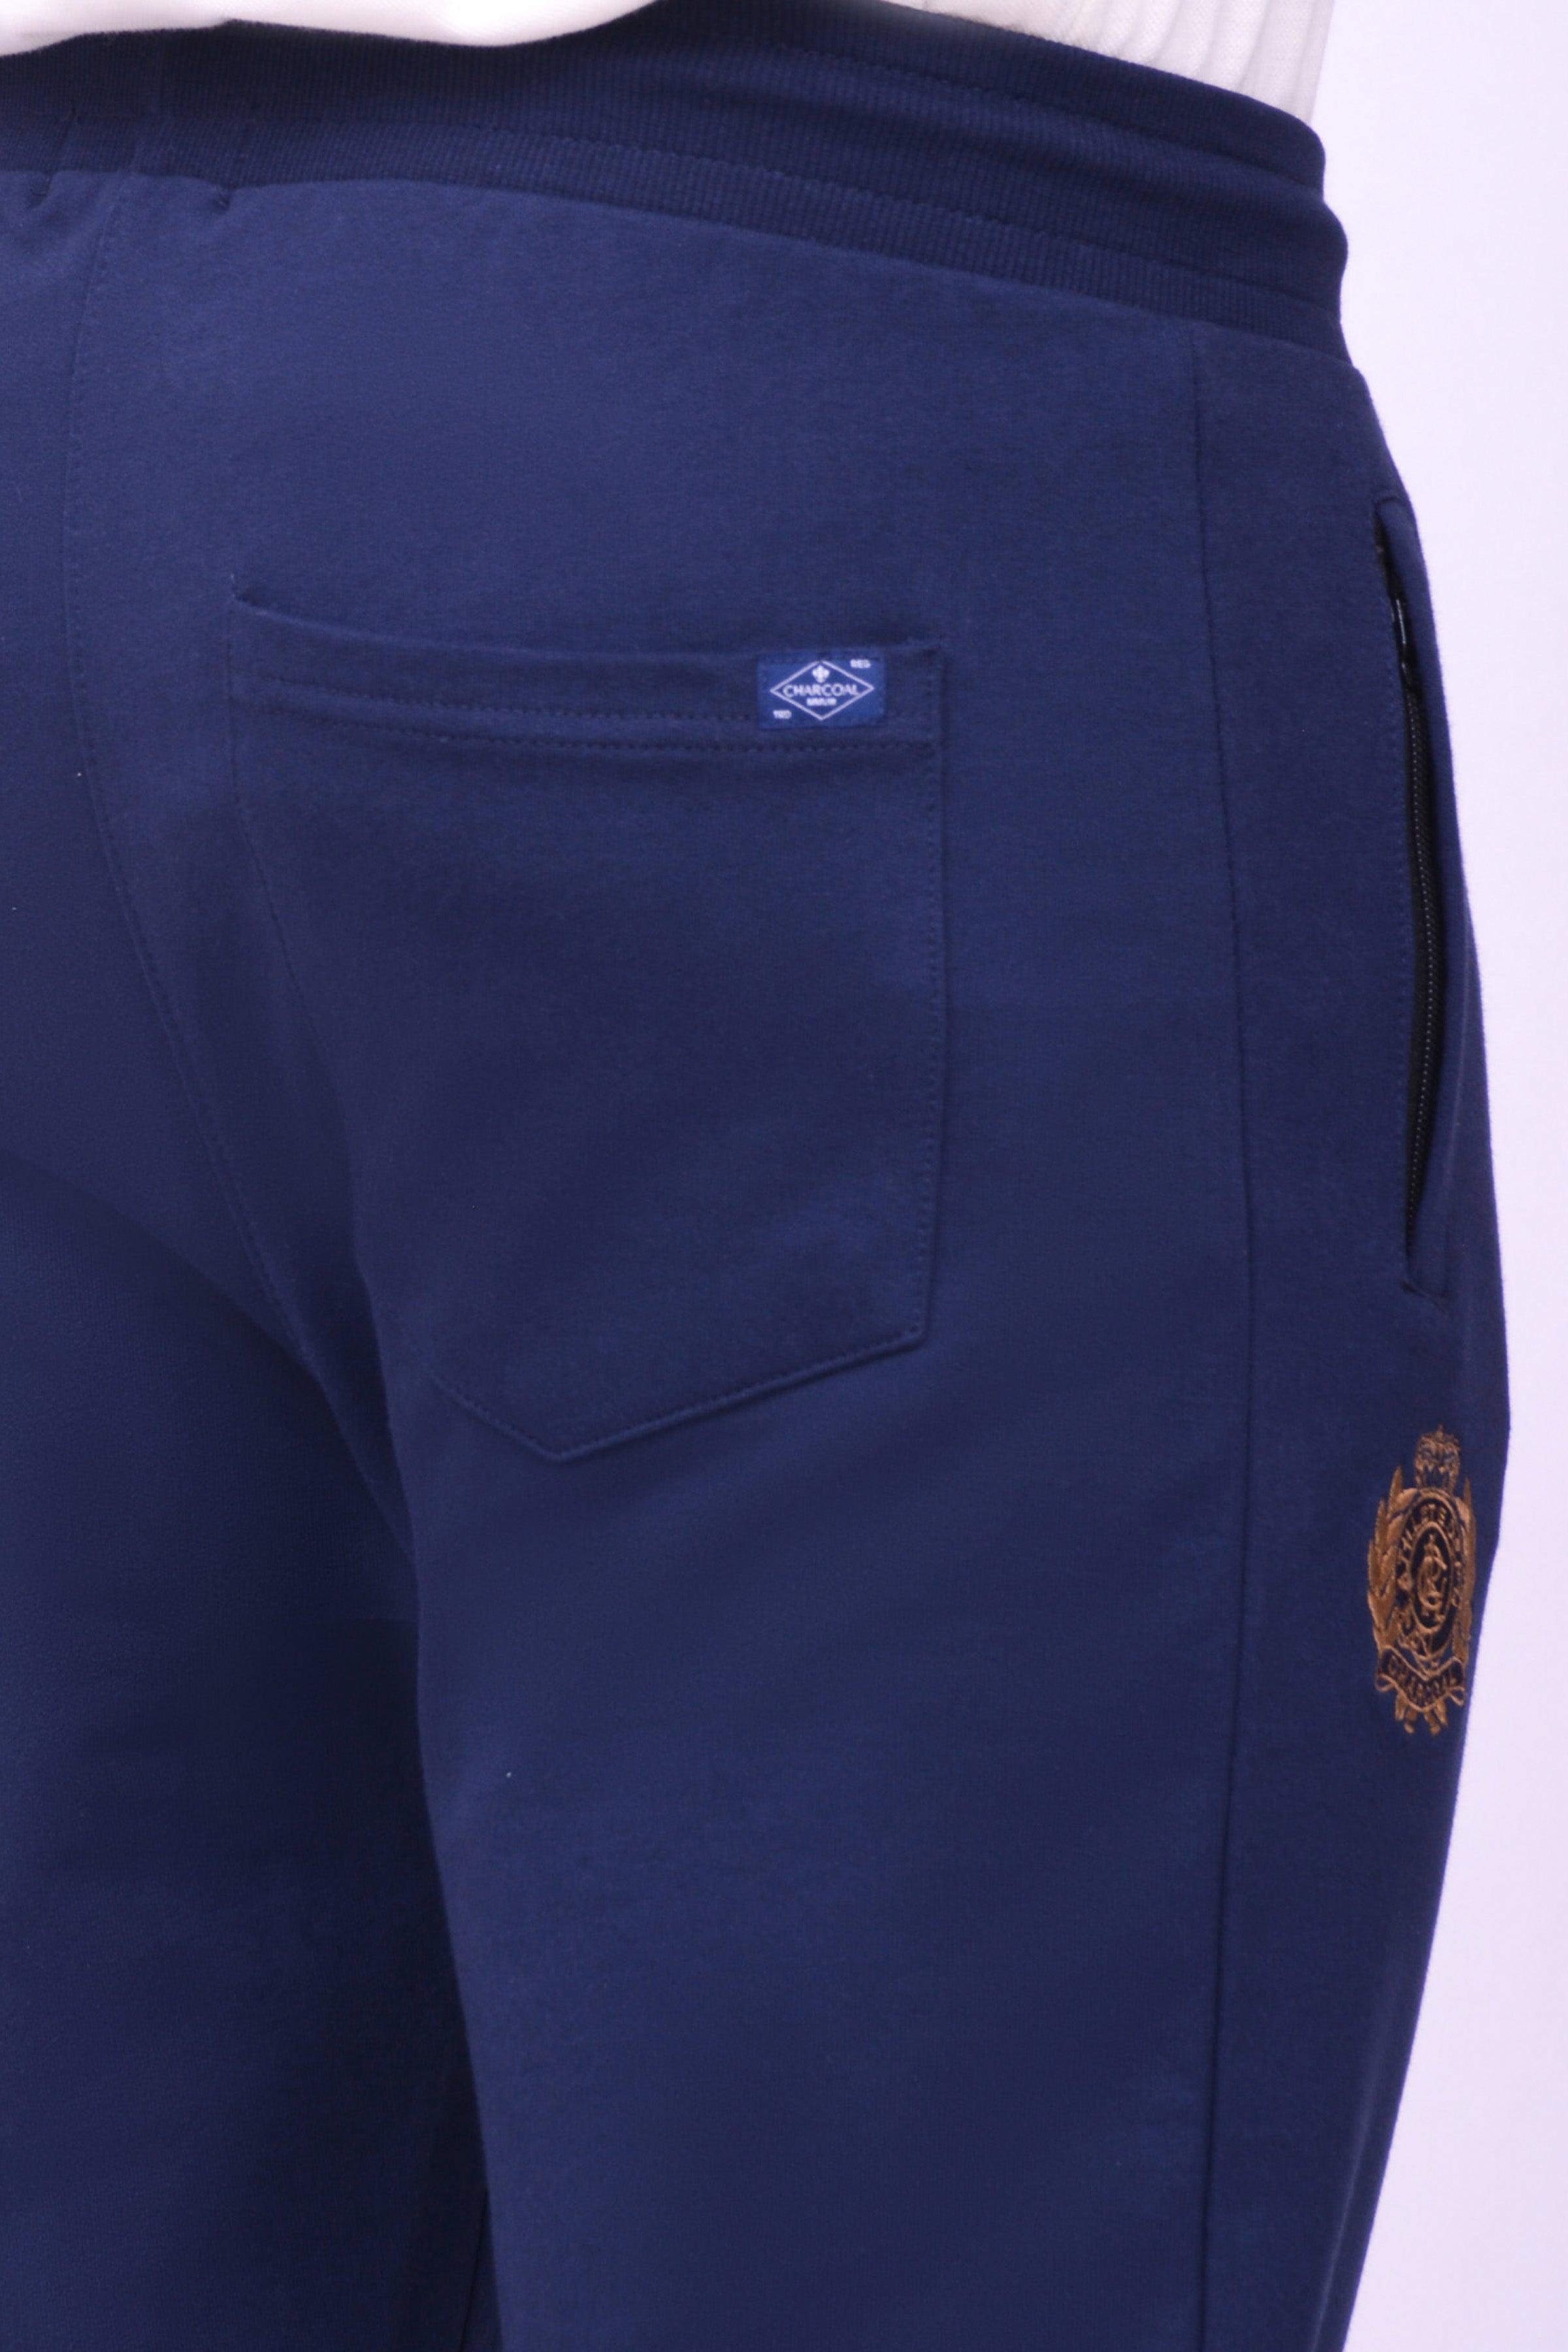 CROSS PANEL TERRY TROUSER NAVY at Charcoal Clothing